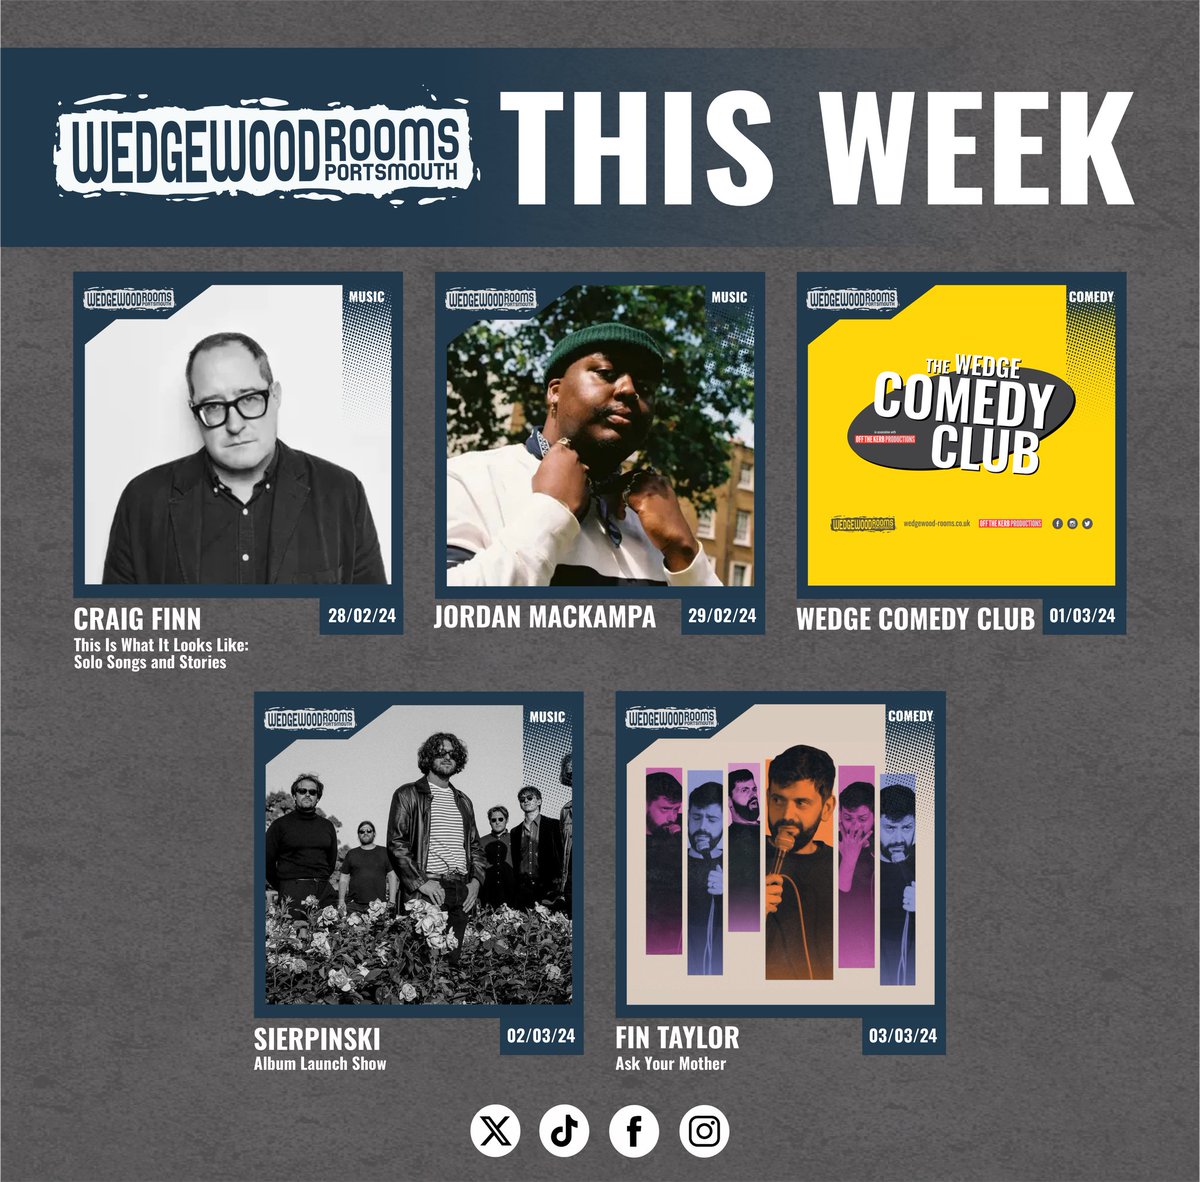 This week at the Wedge!😍 @steadycraig plus special guest @scottlavene @JordanMackampa plus special guest @nectarwoode Comedy Club Sierpinski plus special guests @DeadRabbitsuk, The Straightjakkets + Number 9 @FinTaylorcomedy: Ask Your Mother 👉 wedgewood-rooms.co.uk 👈